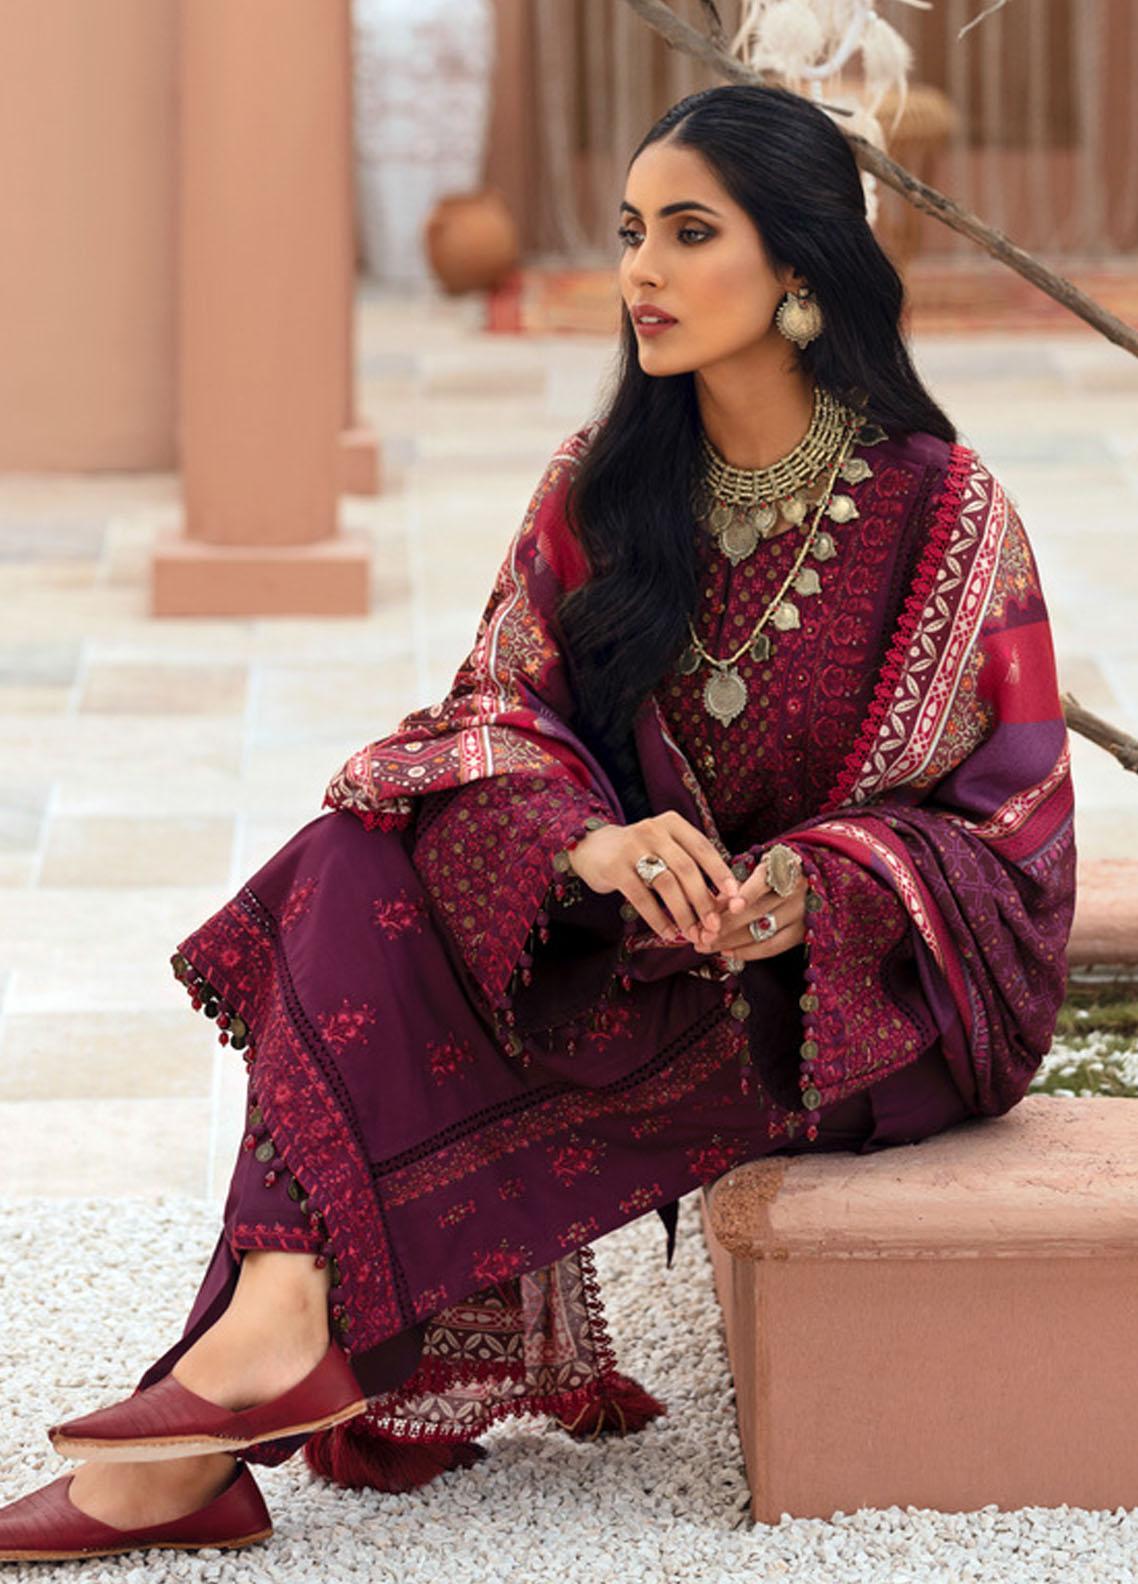 noor-by-saadia-asad-embroidered-shawls-2021-collection-01-_02